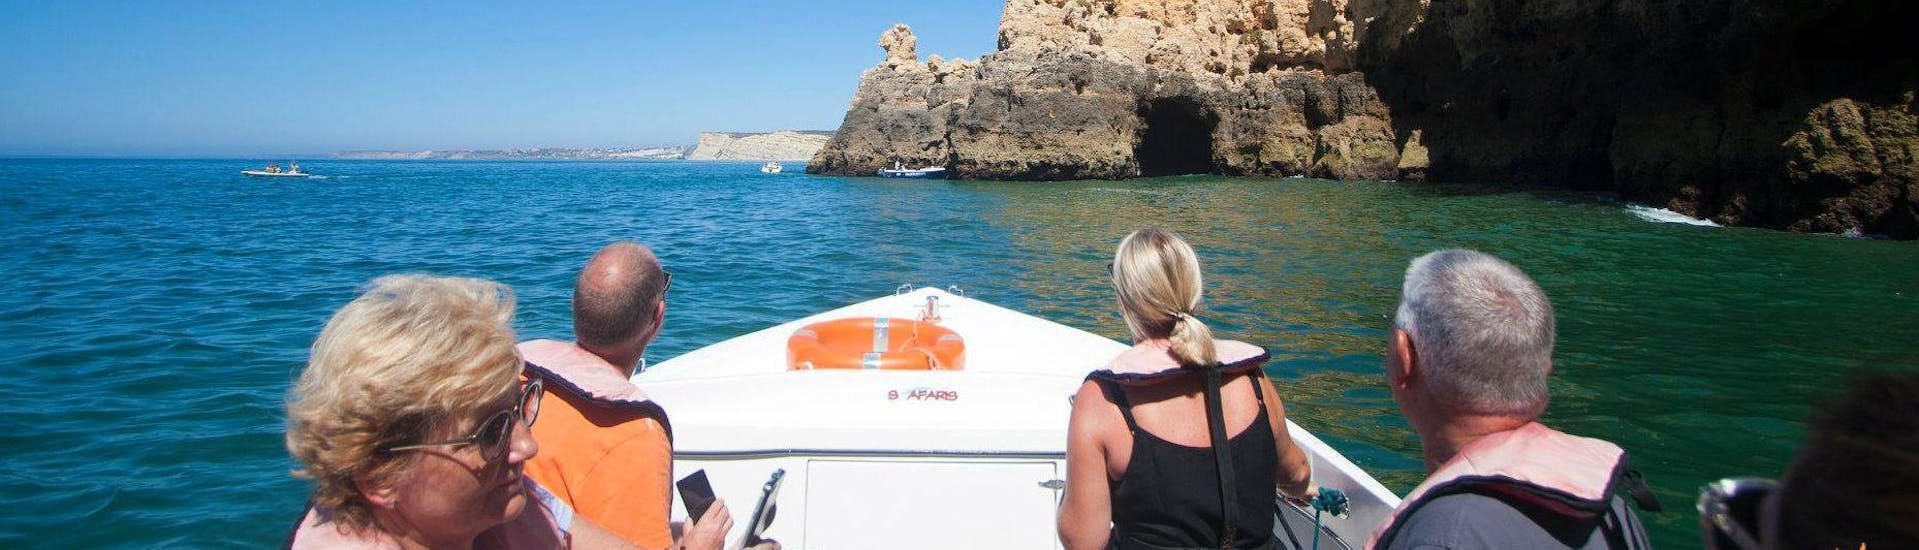 During the boat trip to Ponta da Piedade from Lagos with Seafaris Algarve, the passengers are enjoying the view of the unique rock formations.